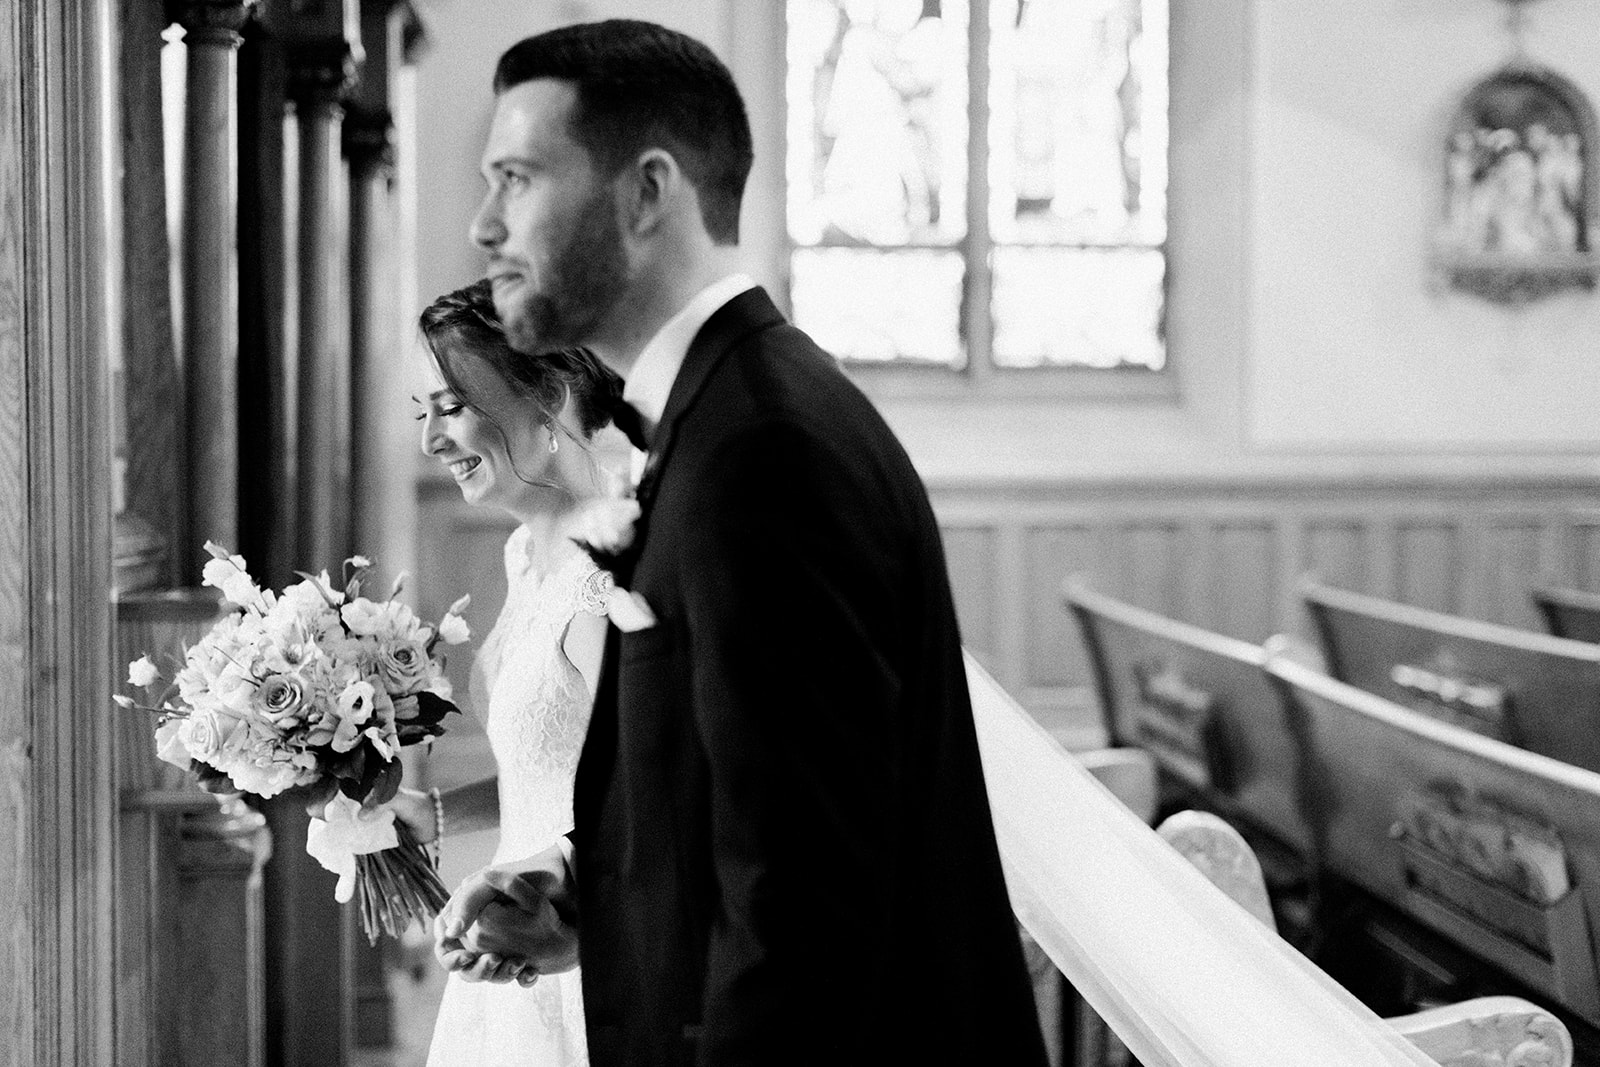 Pennsylvania wedding photographer captures black and white portrait of bride and groom leaving ceremony